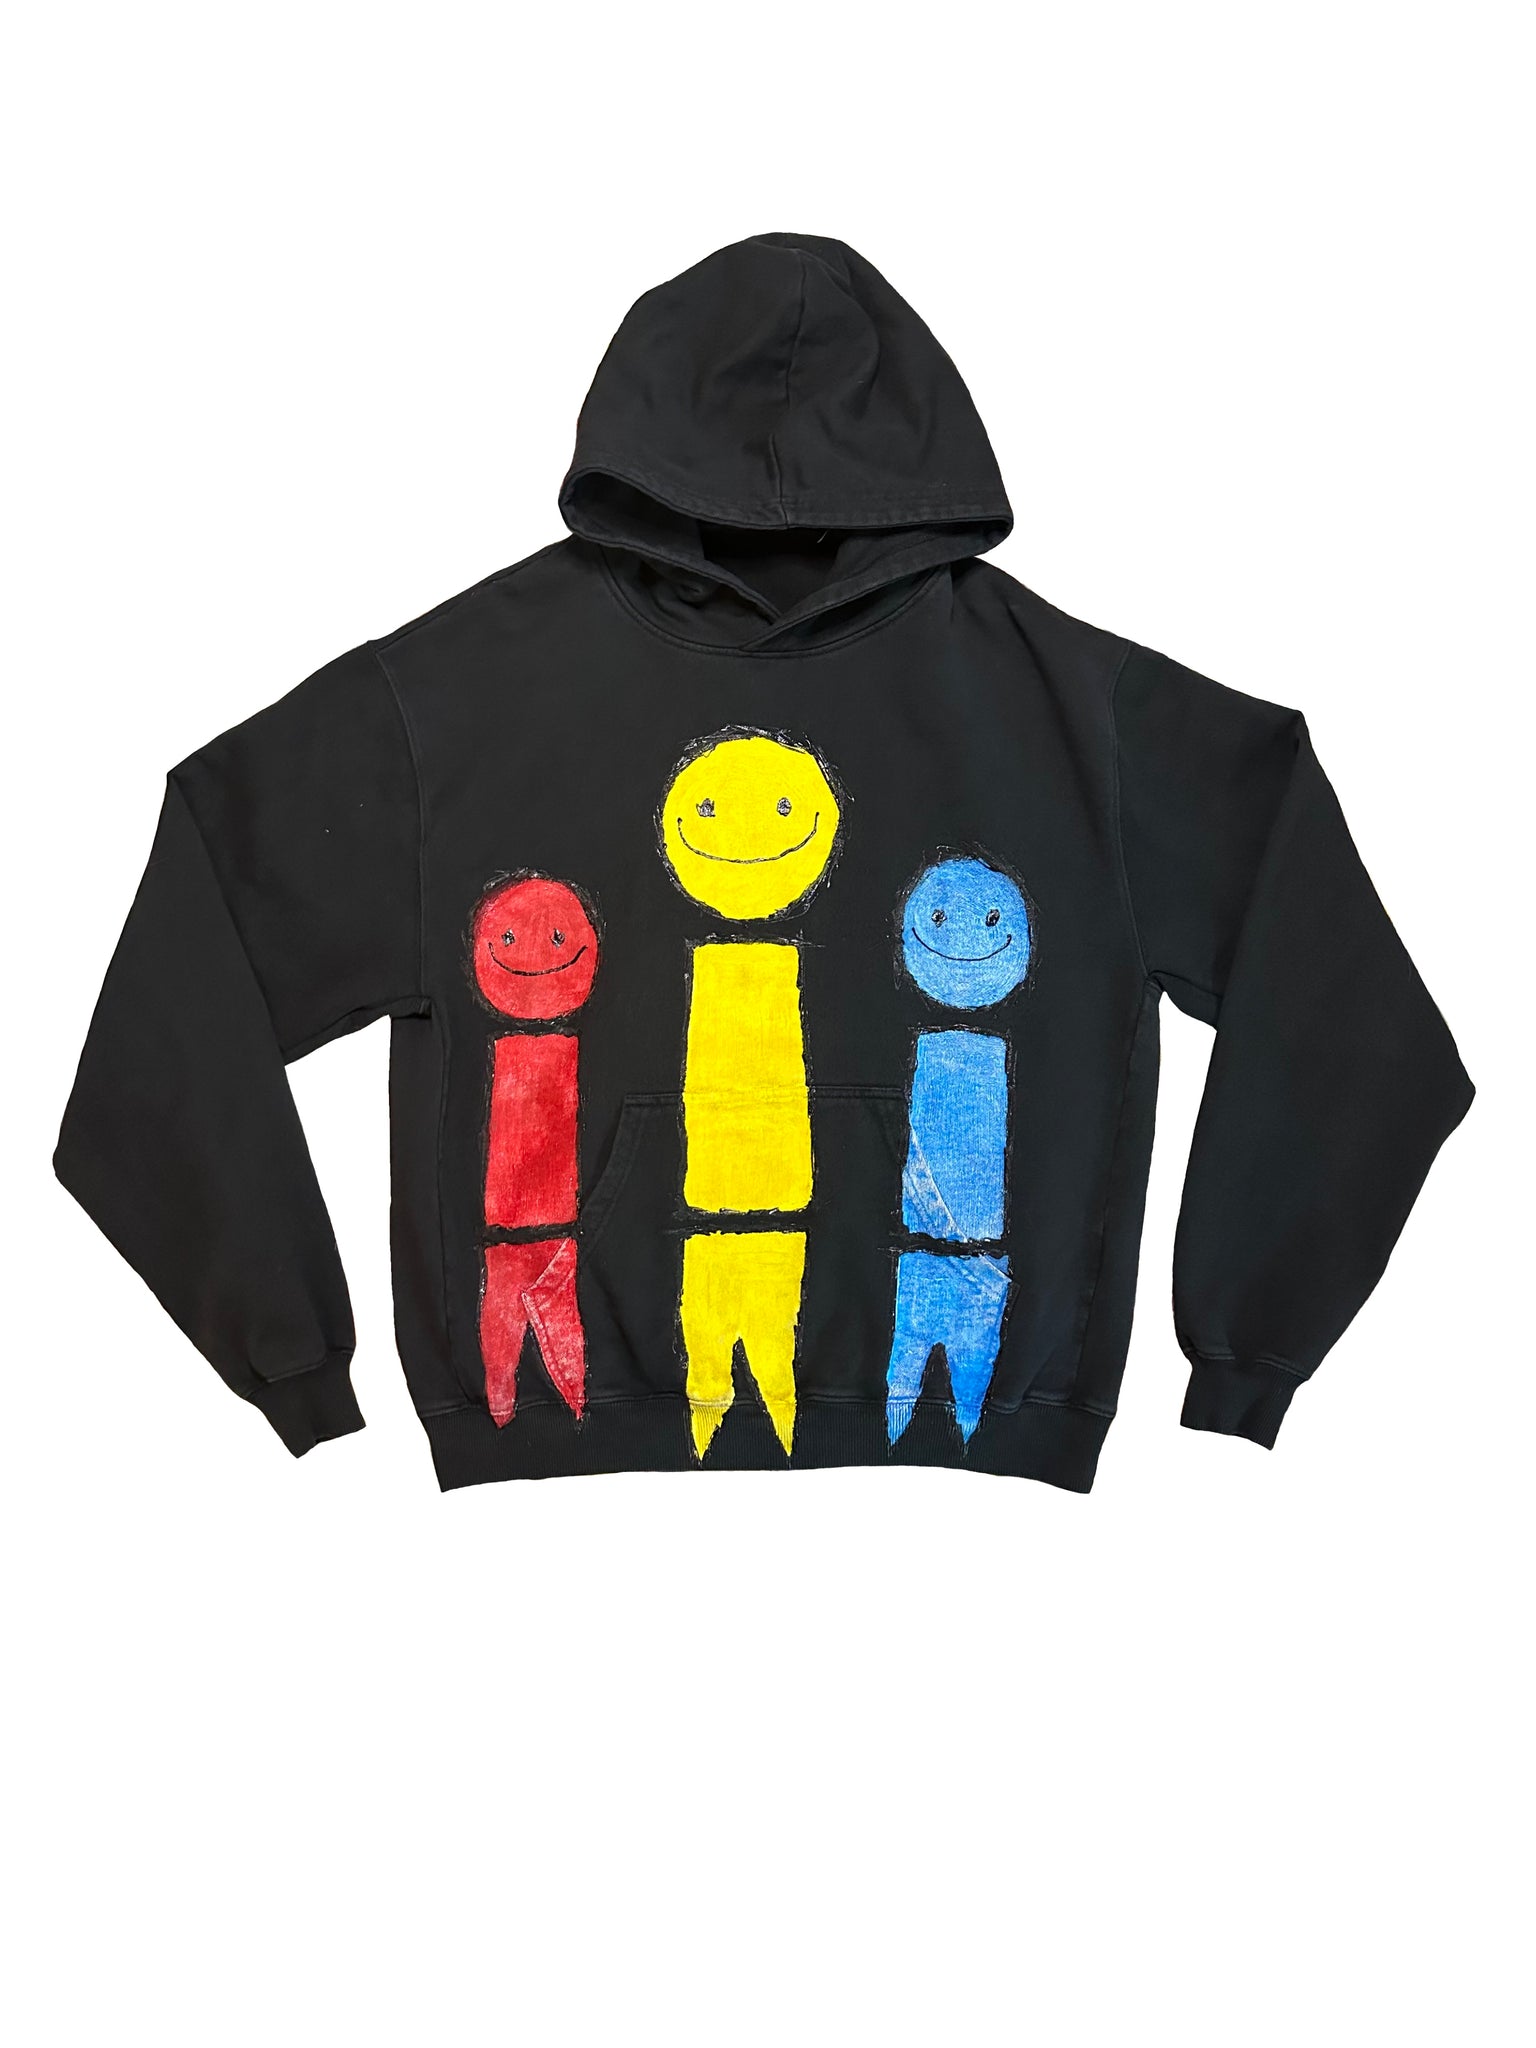 Together Hoodie (Small)